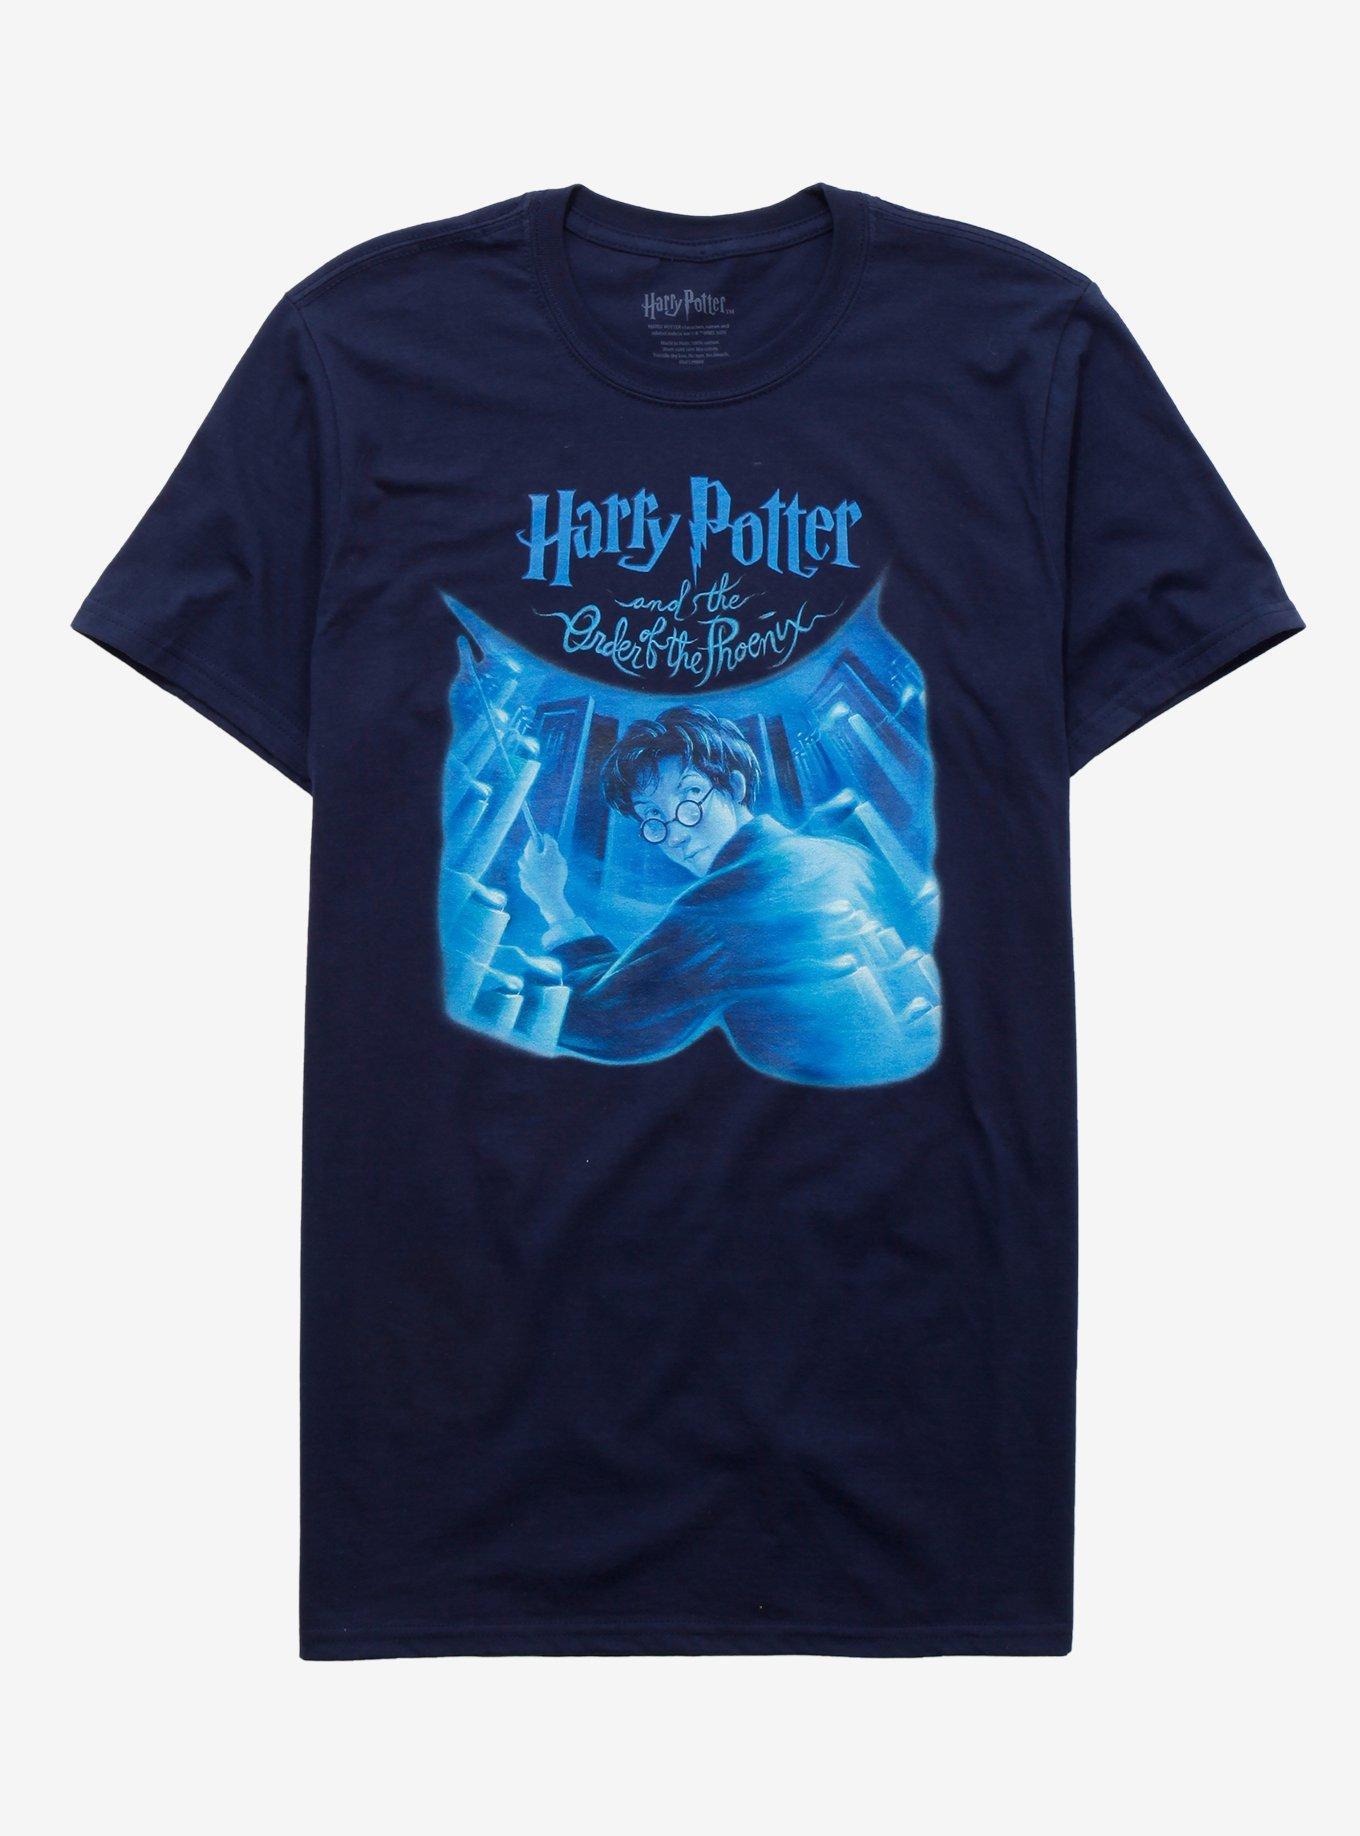 Harry Potter And The Order Of The Phoenix Book Cover T-Shirt, NAVY, hi-res